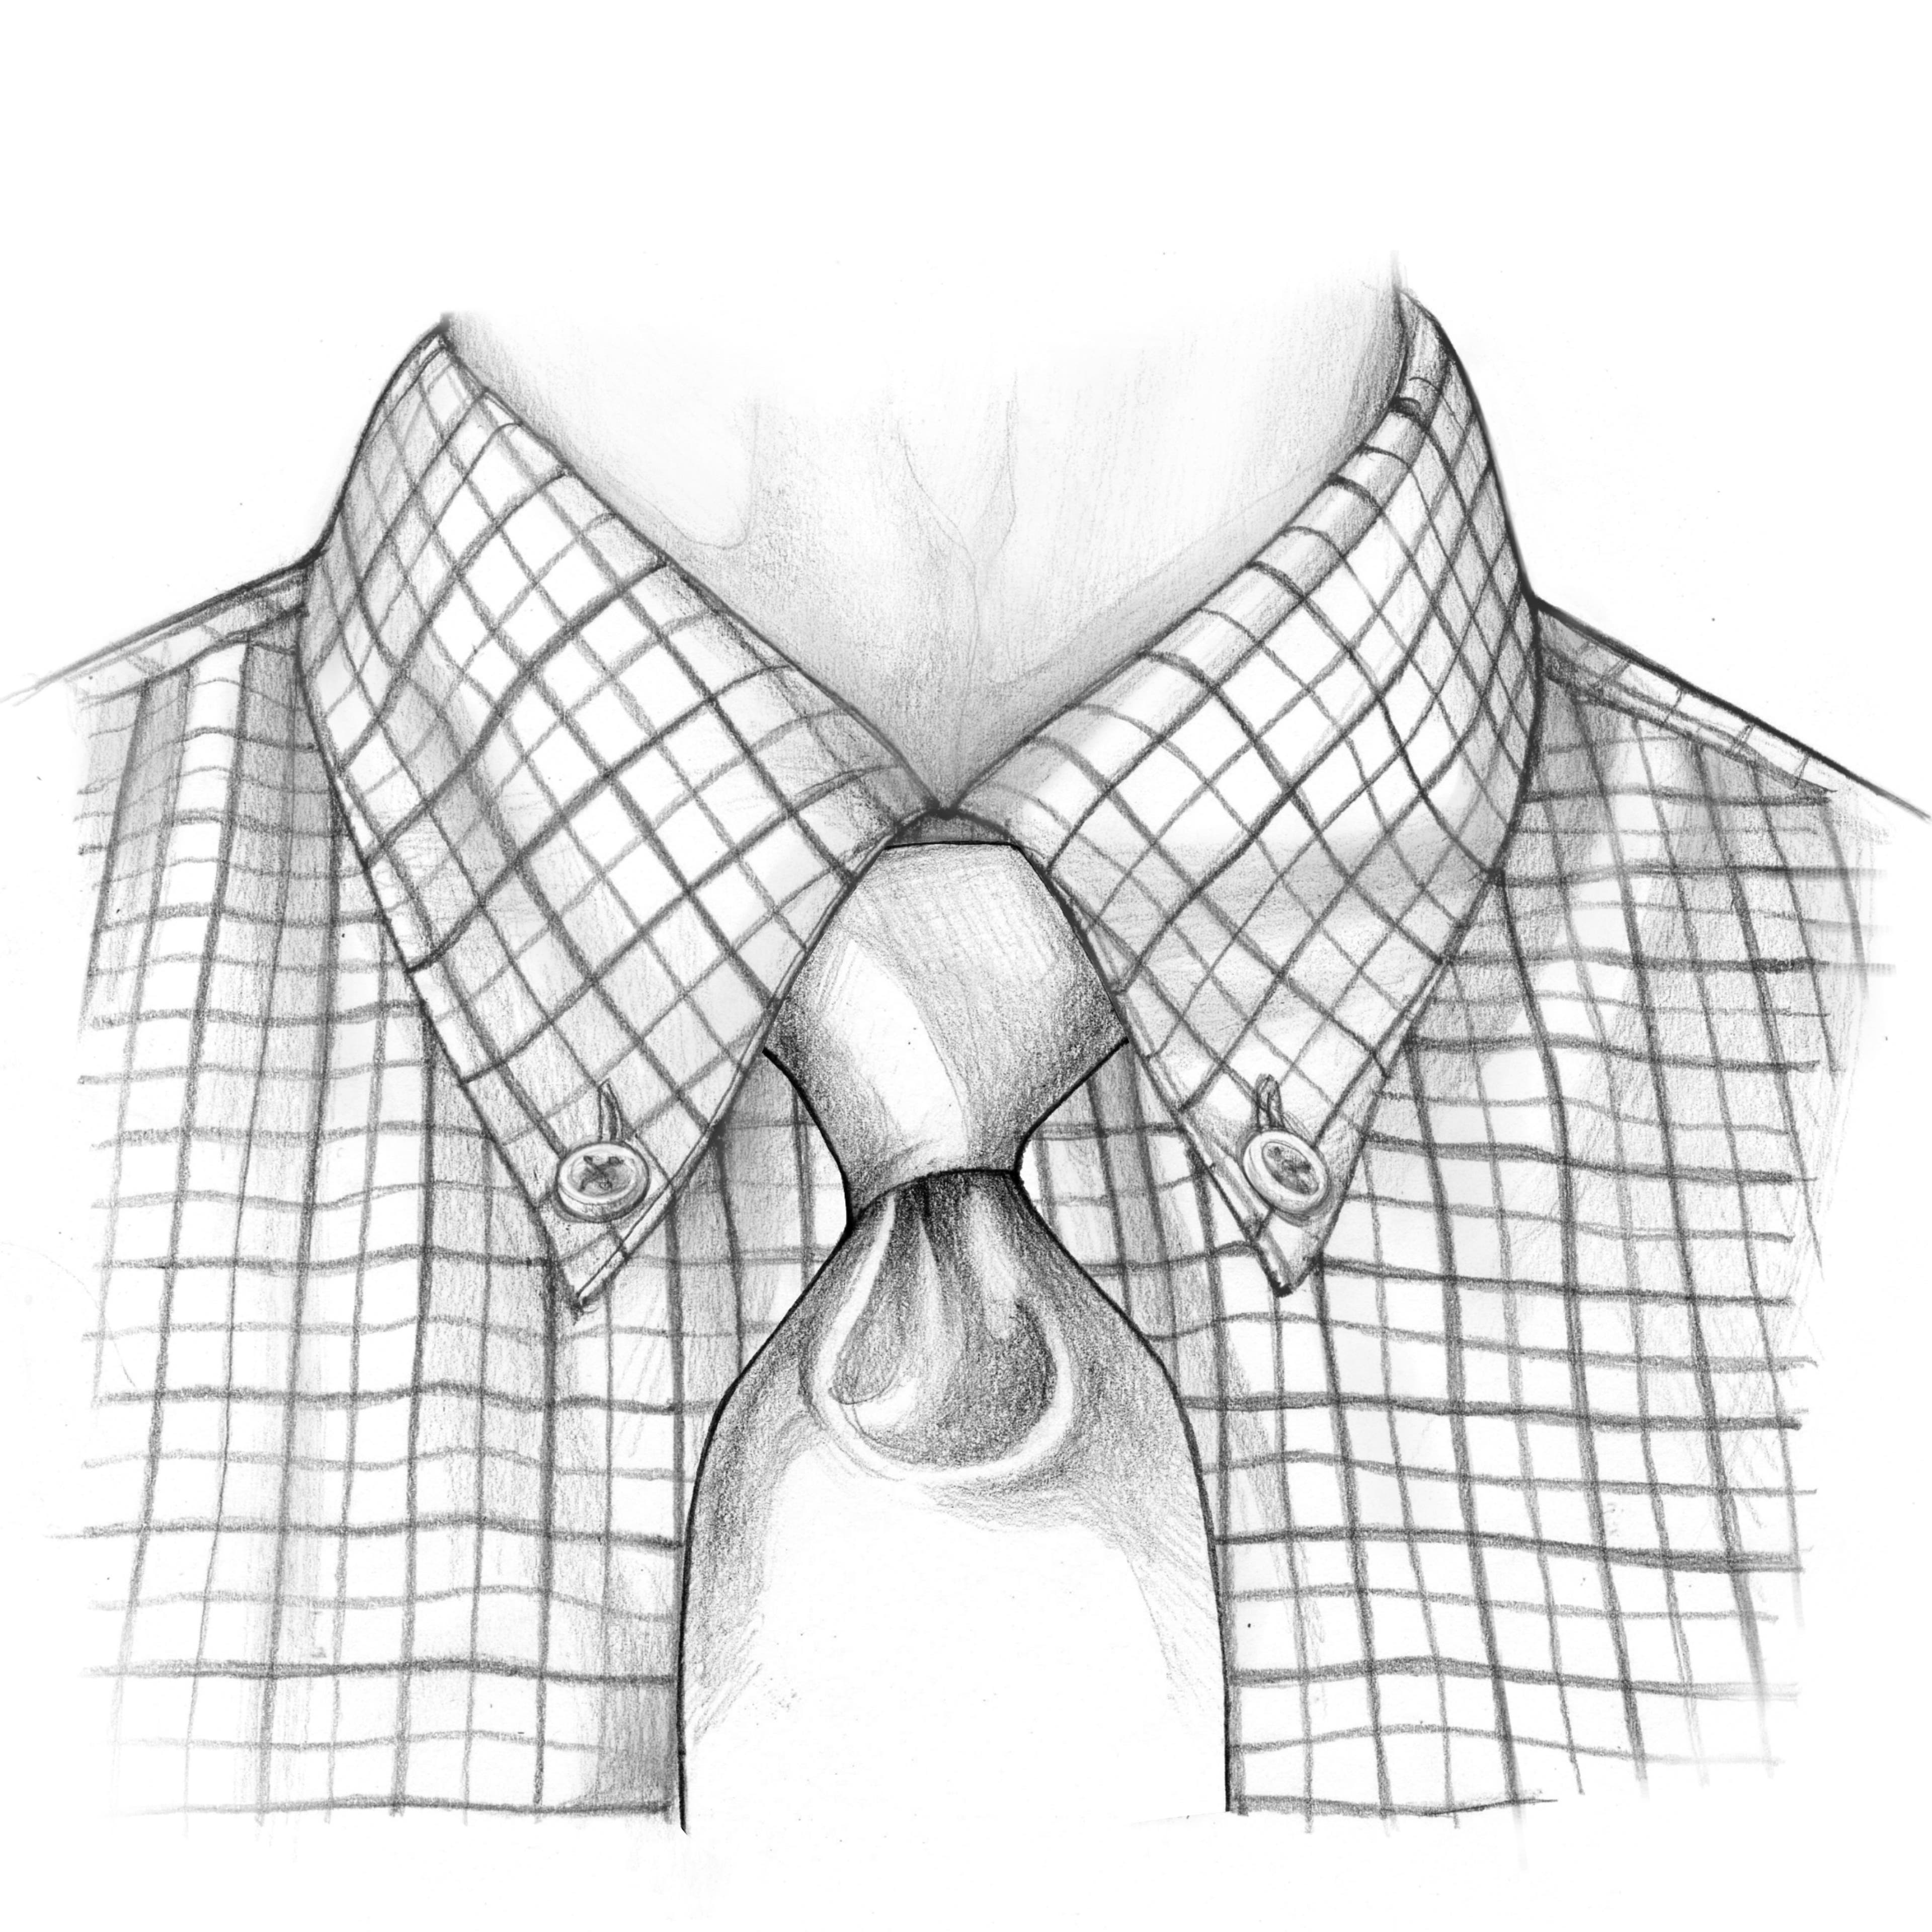 How to tie a tie - VERY simple and easy tie knot for beginners